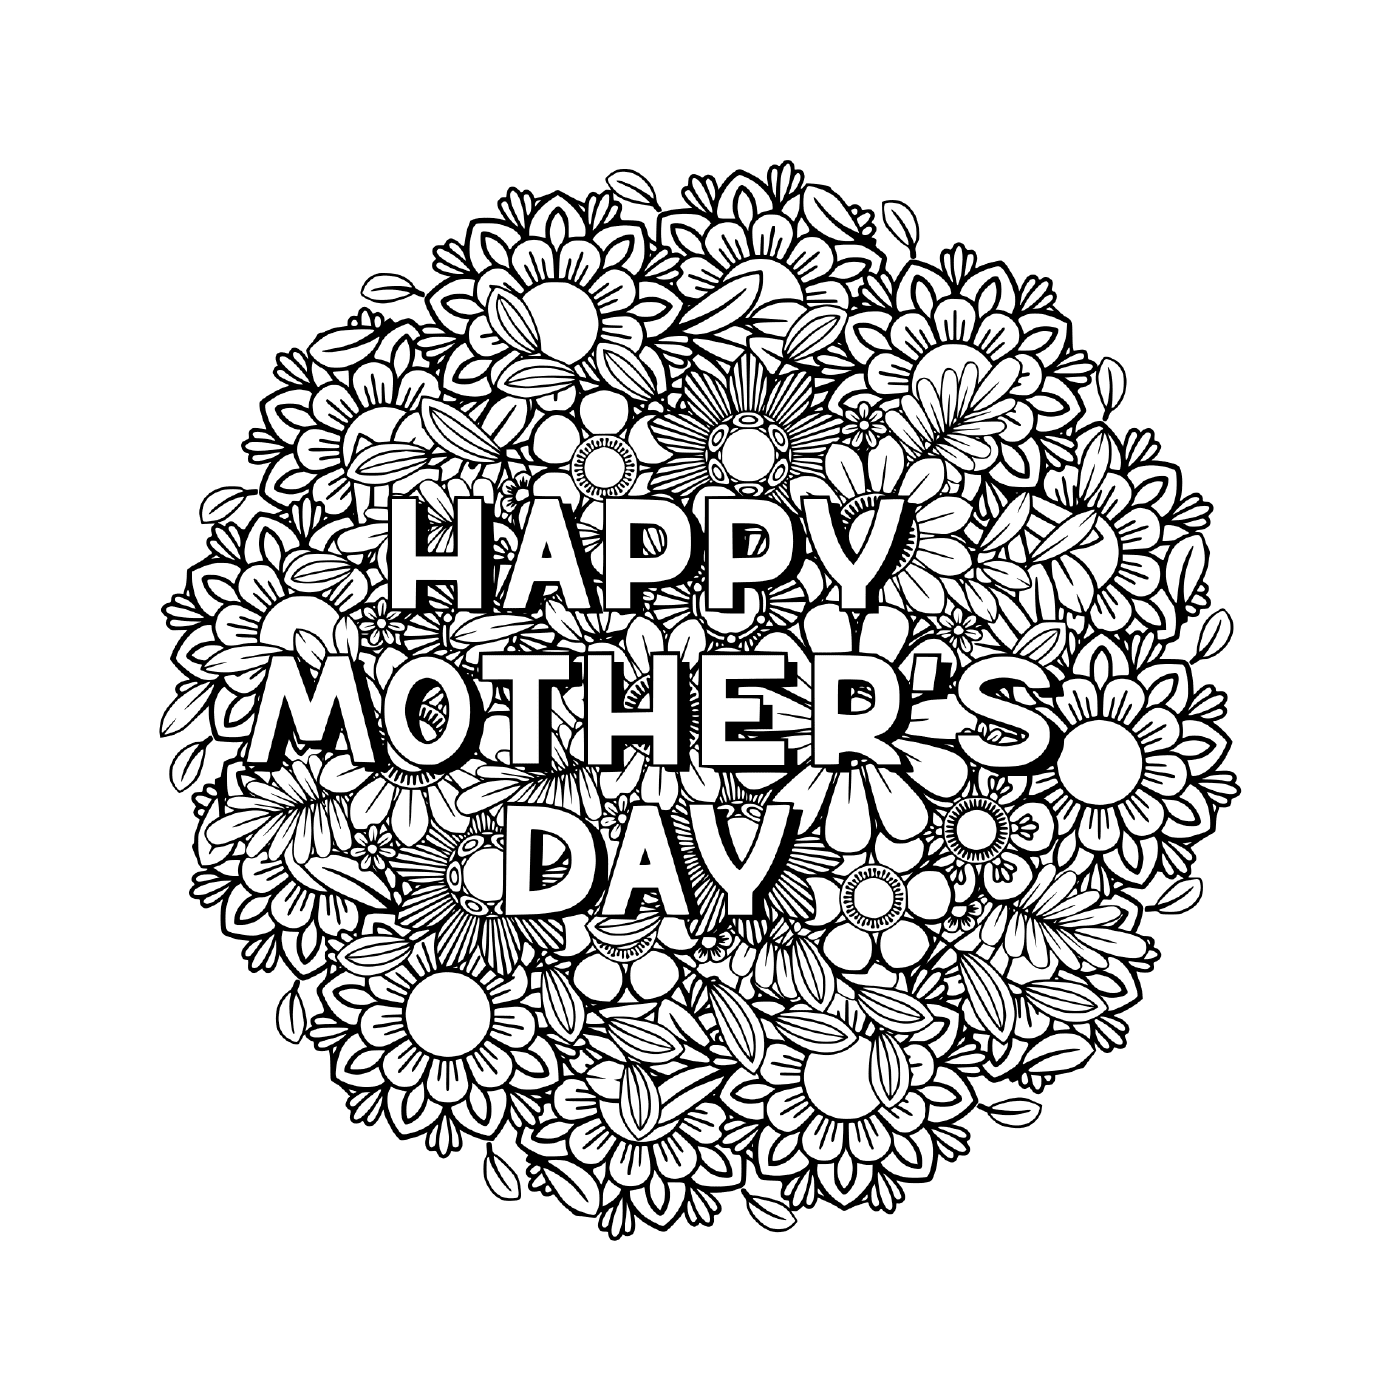  A happy Mother's Day card 